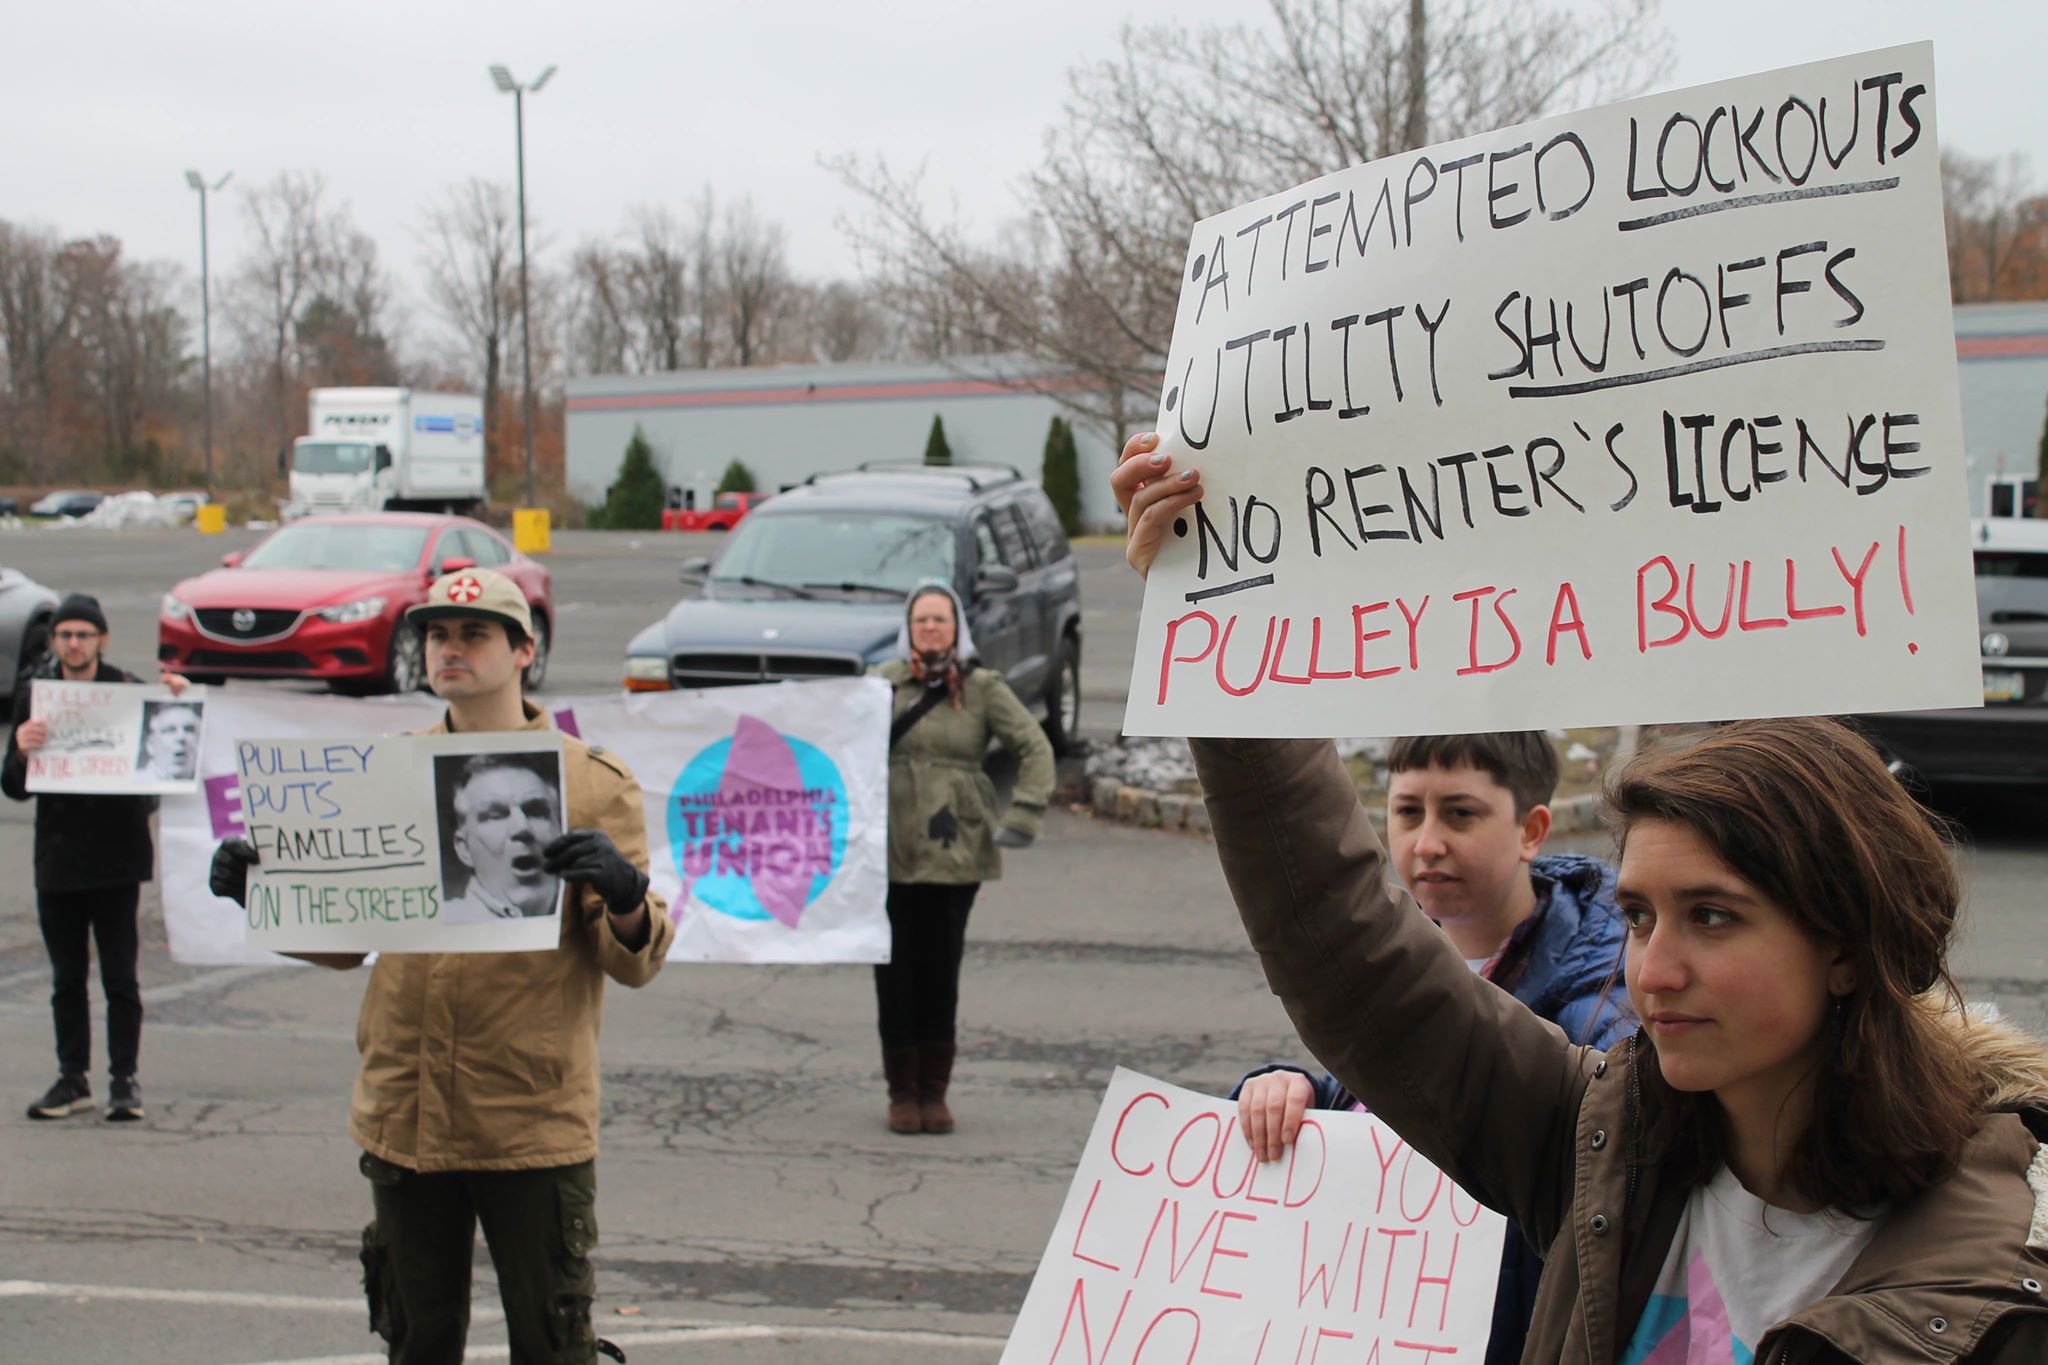 Several activists stand in a parking lot. A sign reads "Attempted lockouts, utility shutoffs, no renter's license, Pulley is a bully!"